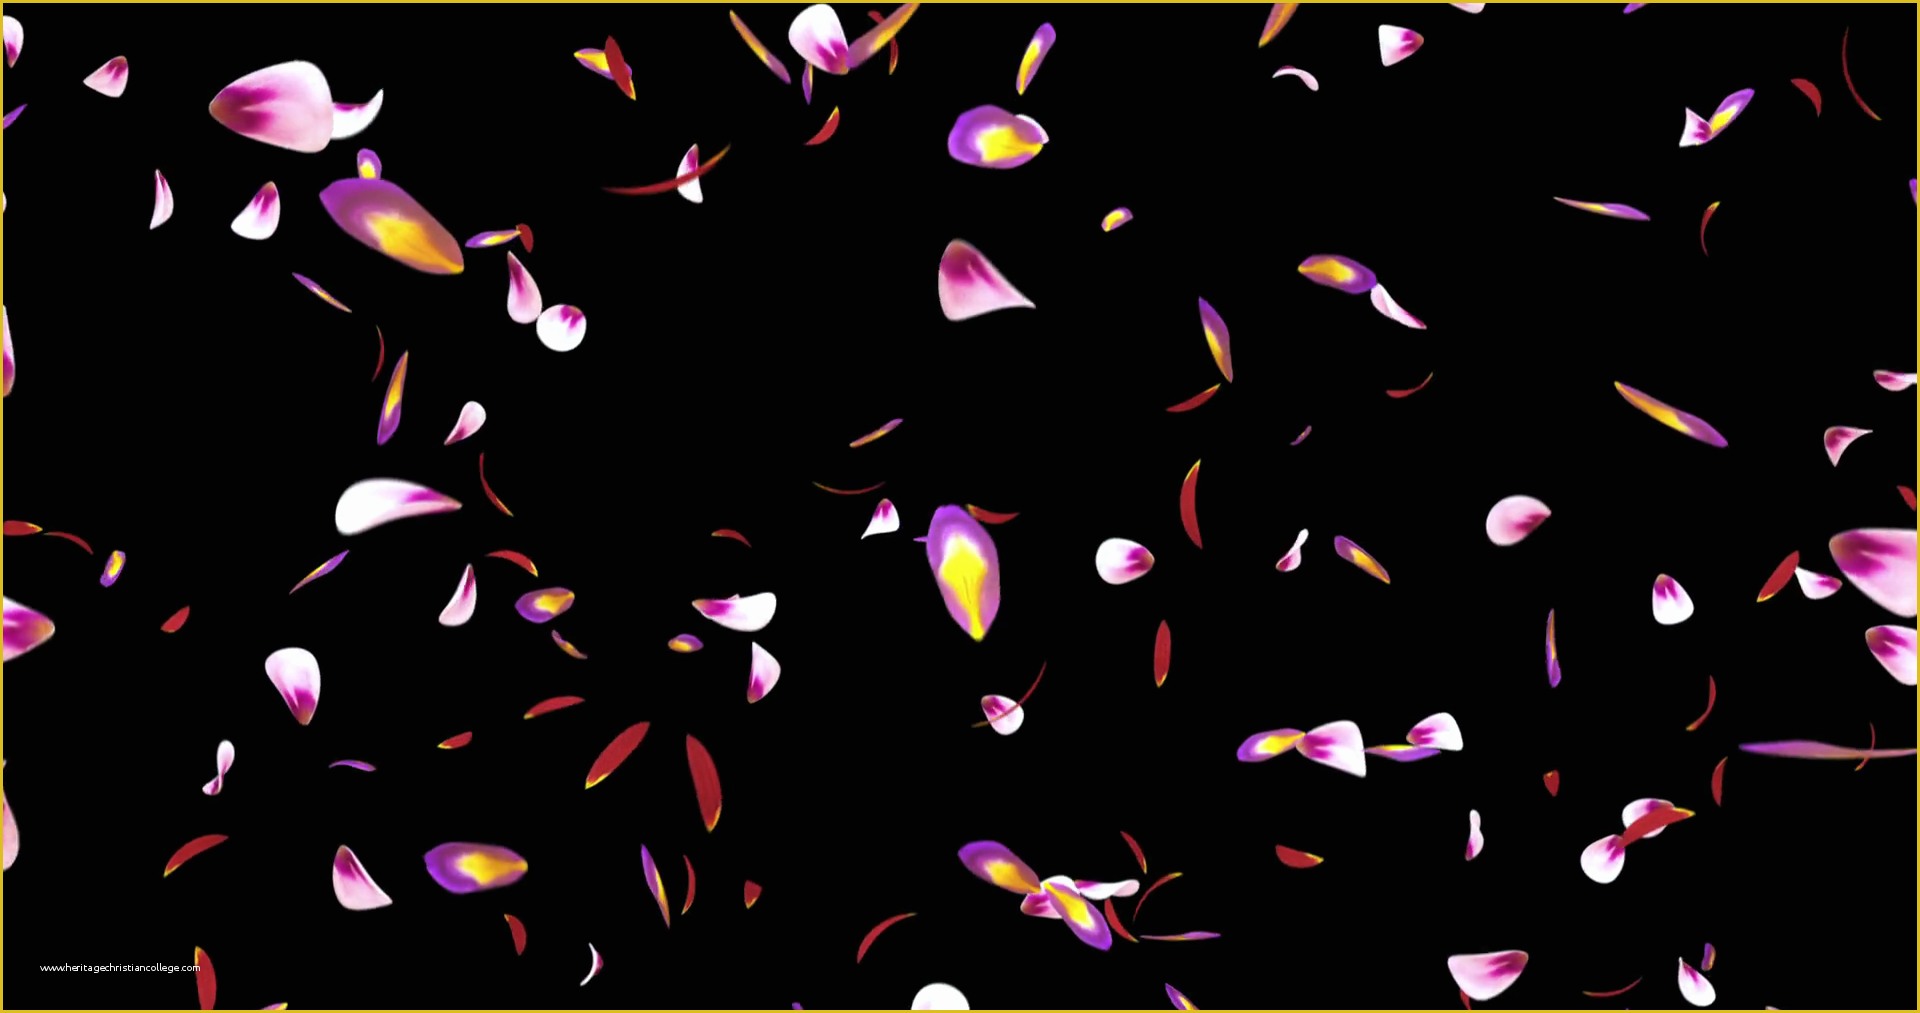 Falling Flower Petals after Effects Template Free Of Falling Red Pink Purple Sakura Flower Petals Background